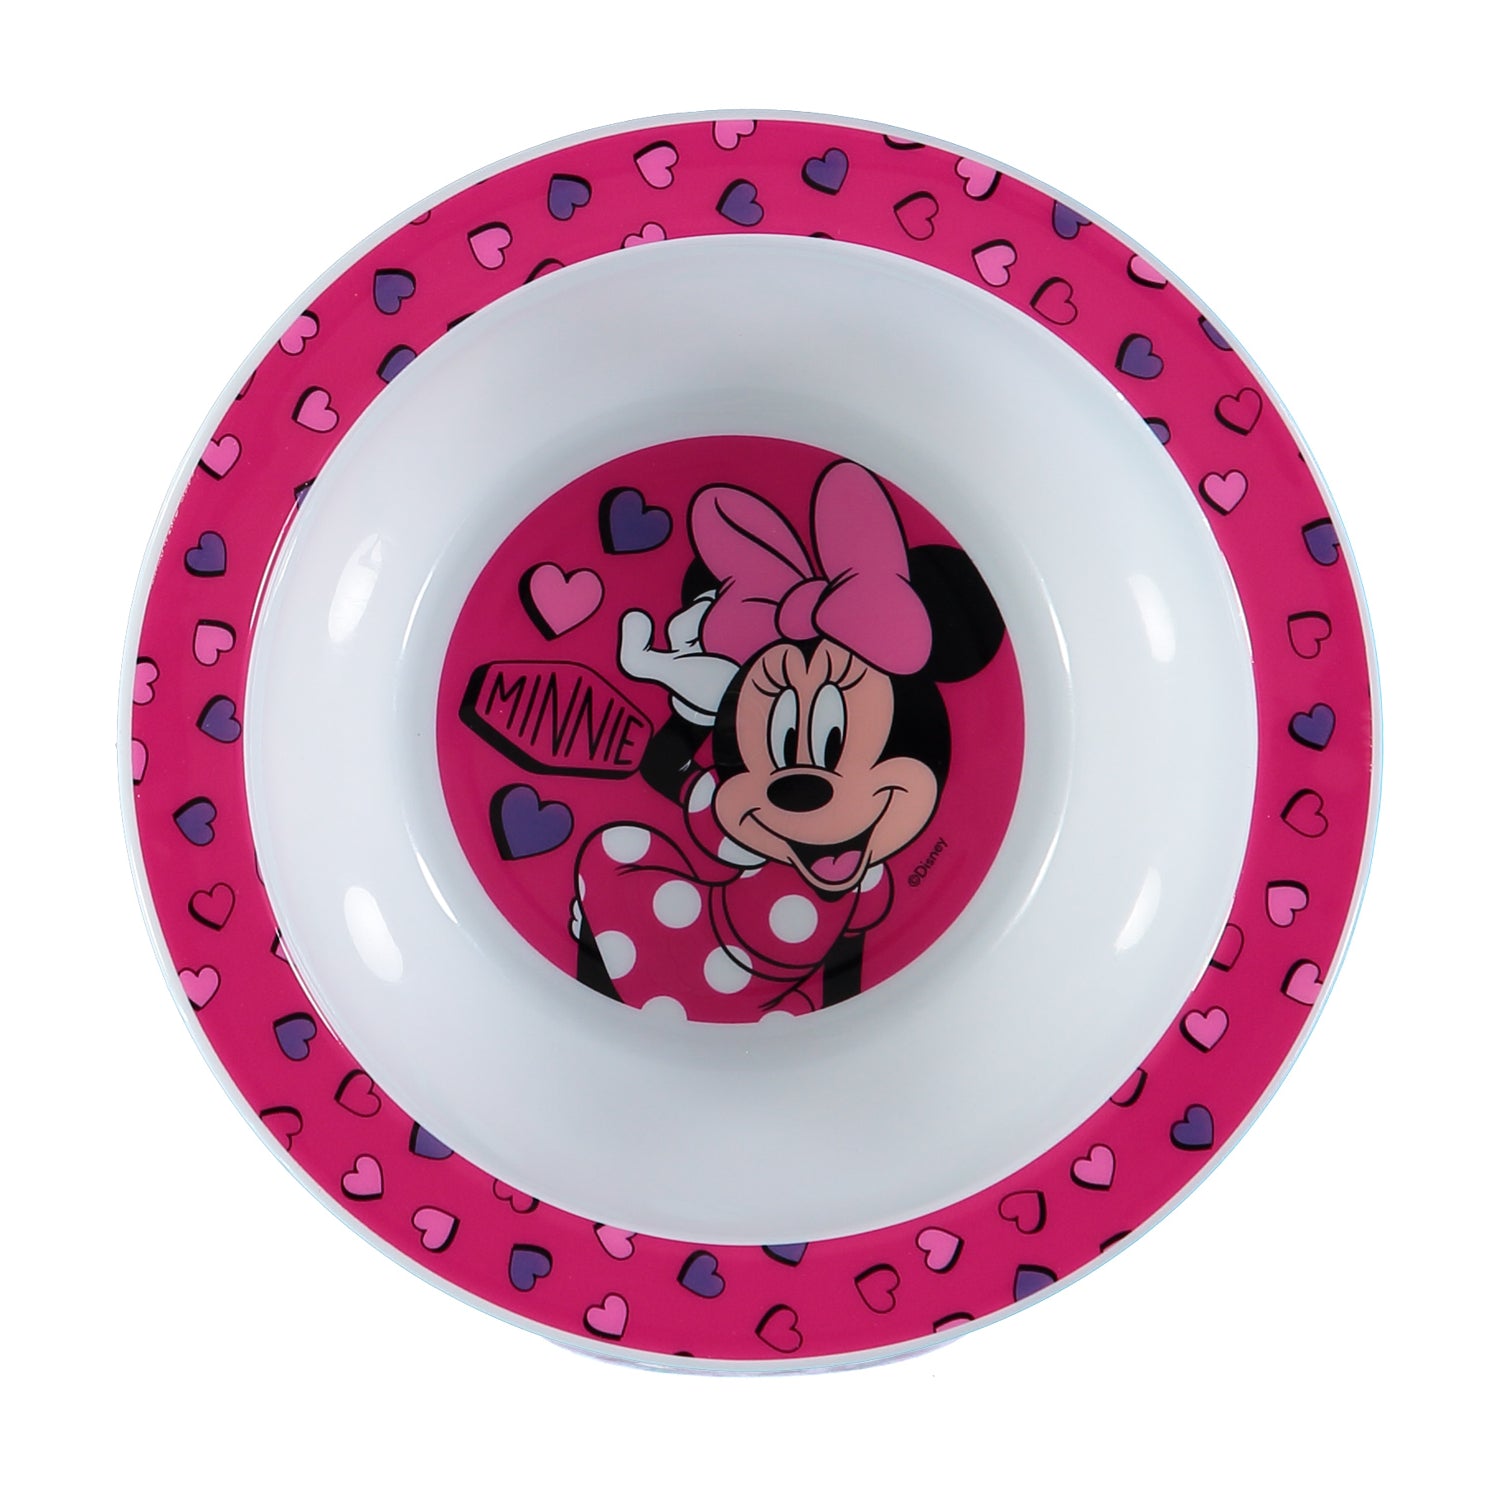 Disney Baby Minnie Mouse 3-Piece Dinner Set: Plate, Bowl and Cup